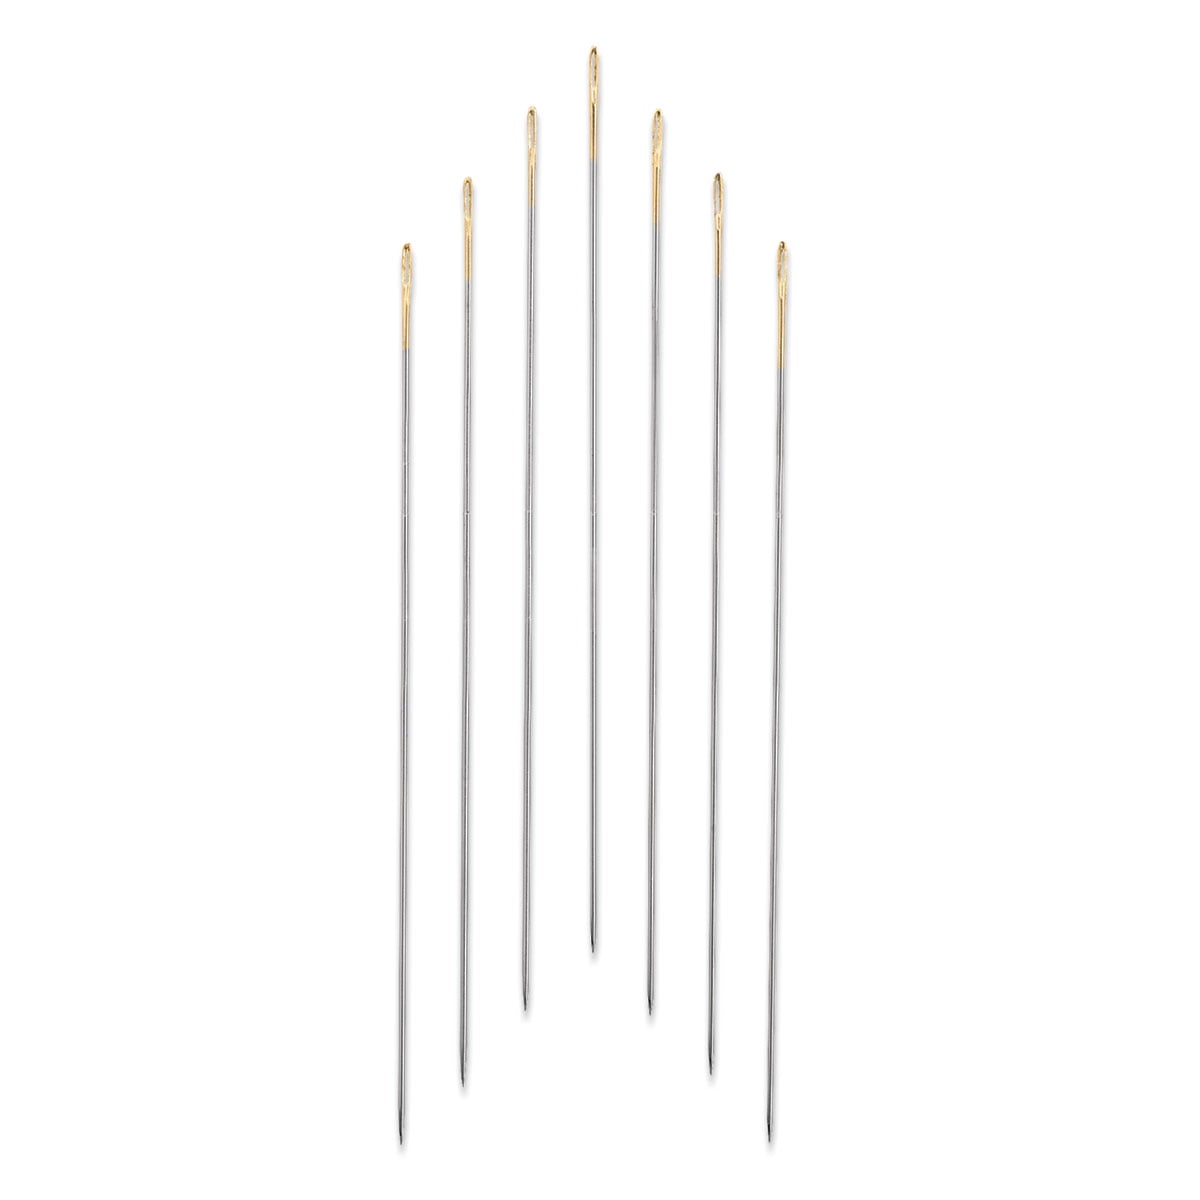 Beads Needles 01# Jewelry Accessories Steel Beading Needles Big Eye Beading Threading String Needles Hand Tools for Professioanl or Beginner Craft Making